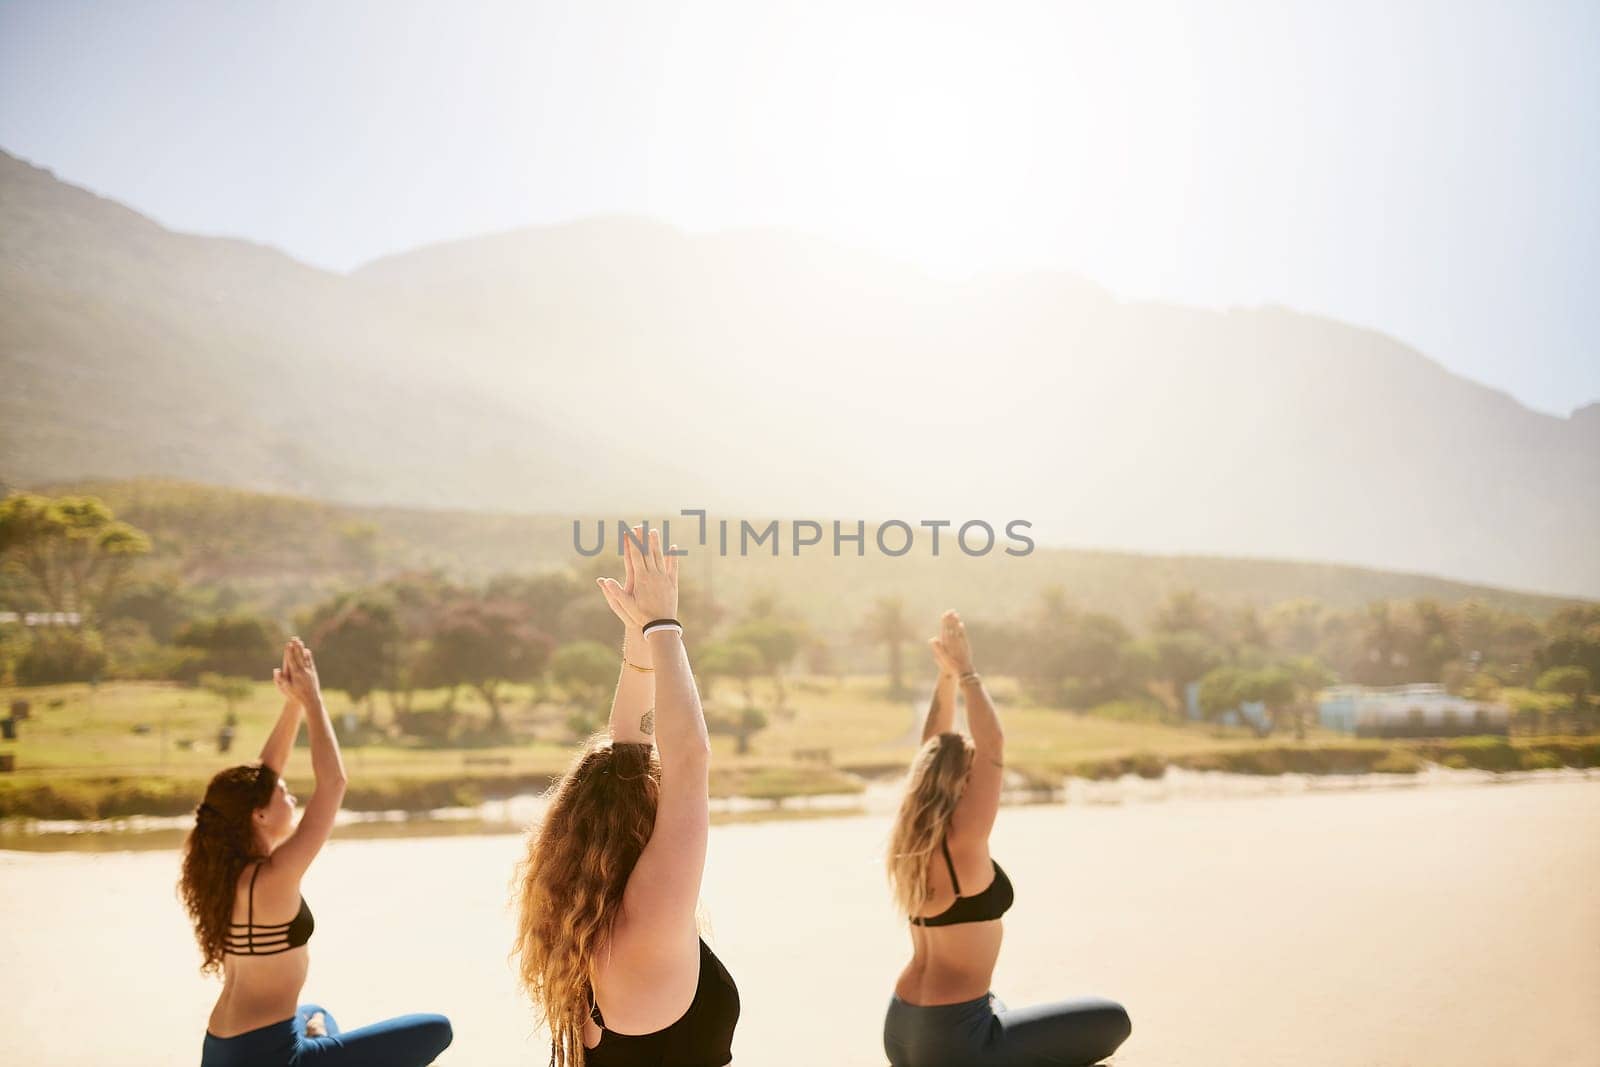 Yoga gives you the means to develop patience. three young women practising yoga on the beach. by YuriArcurs